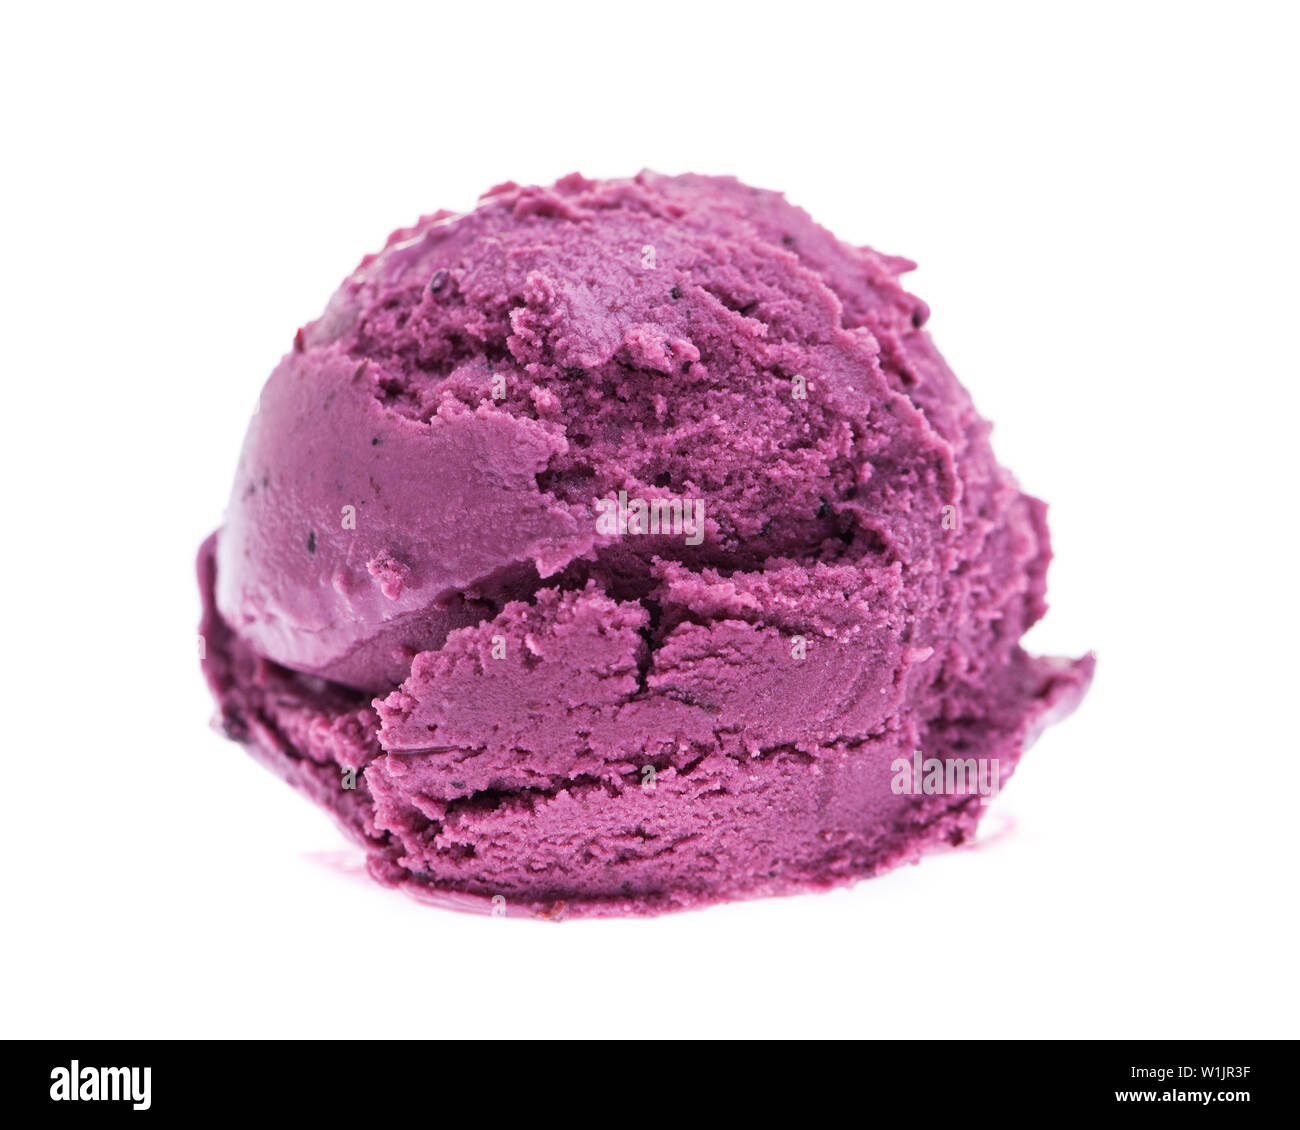 A scoop of blueberry ice cream isolated on white backgound Stock Photo